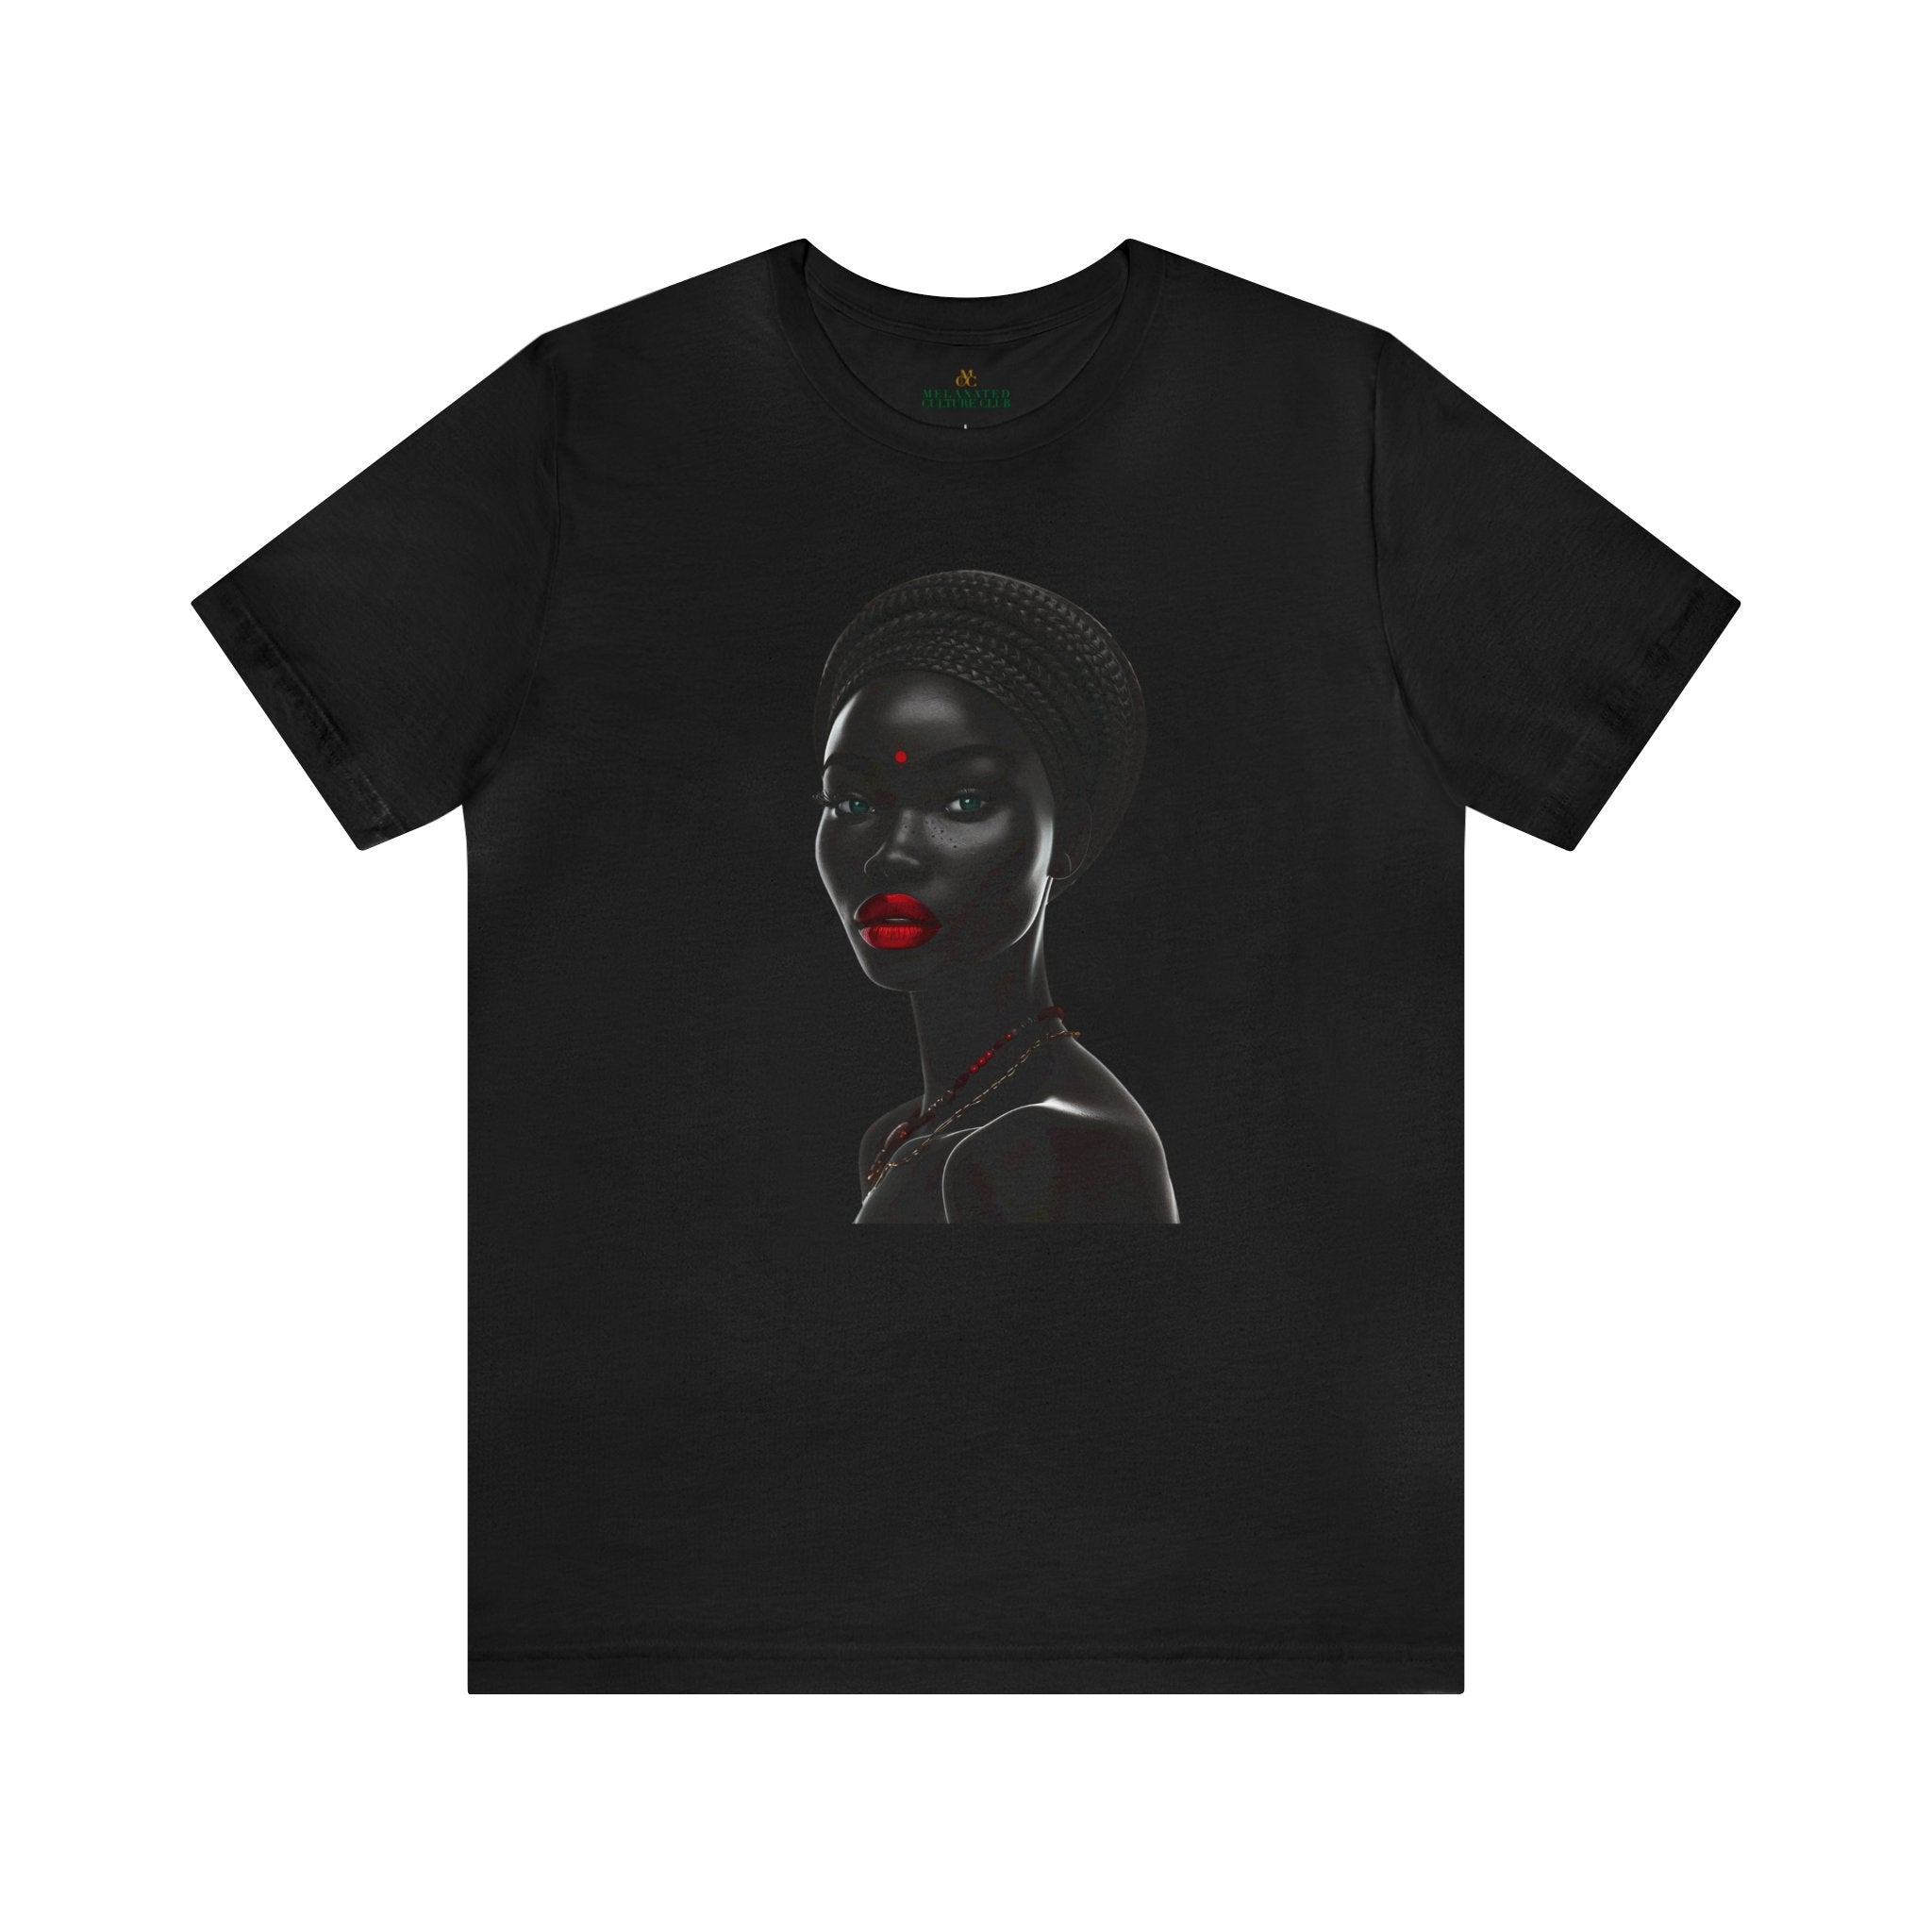 Afrocentric Black Beauty tee shirt in black.